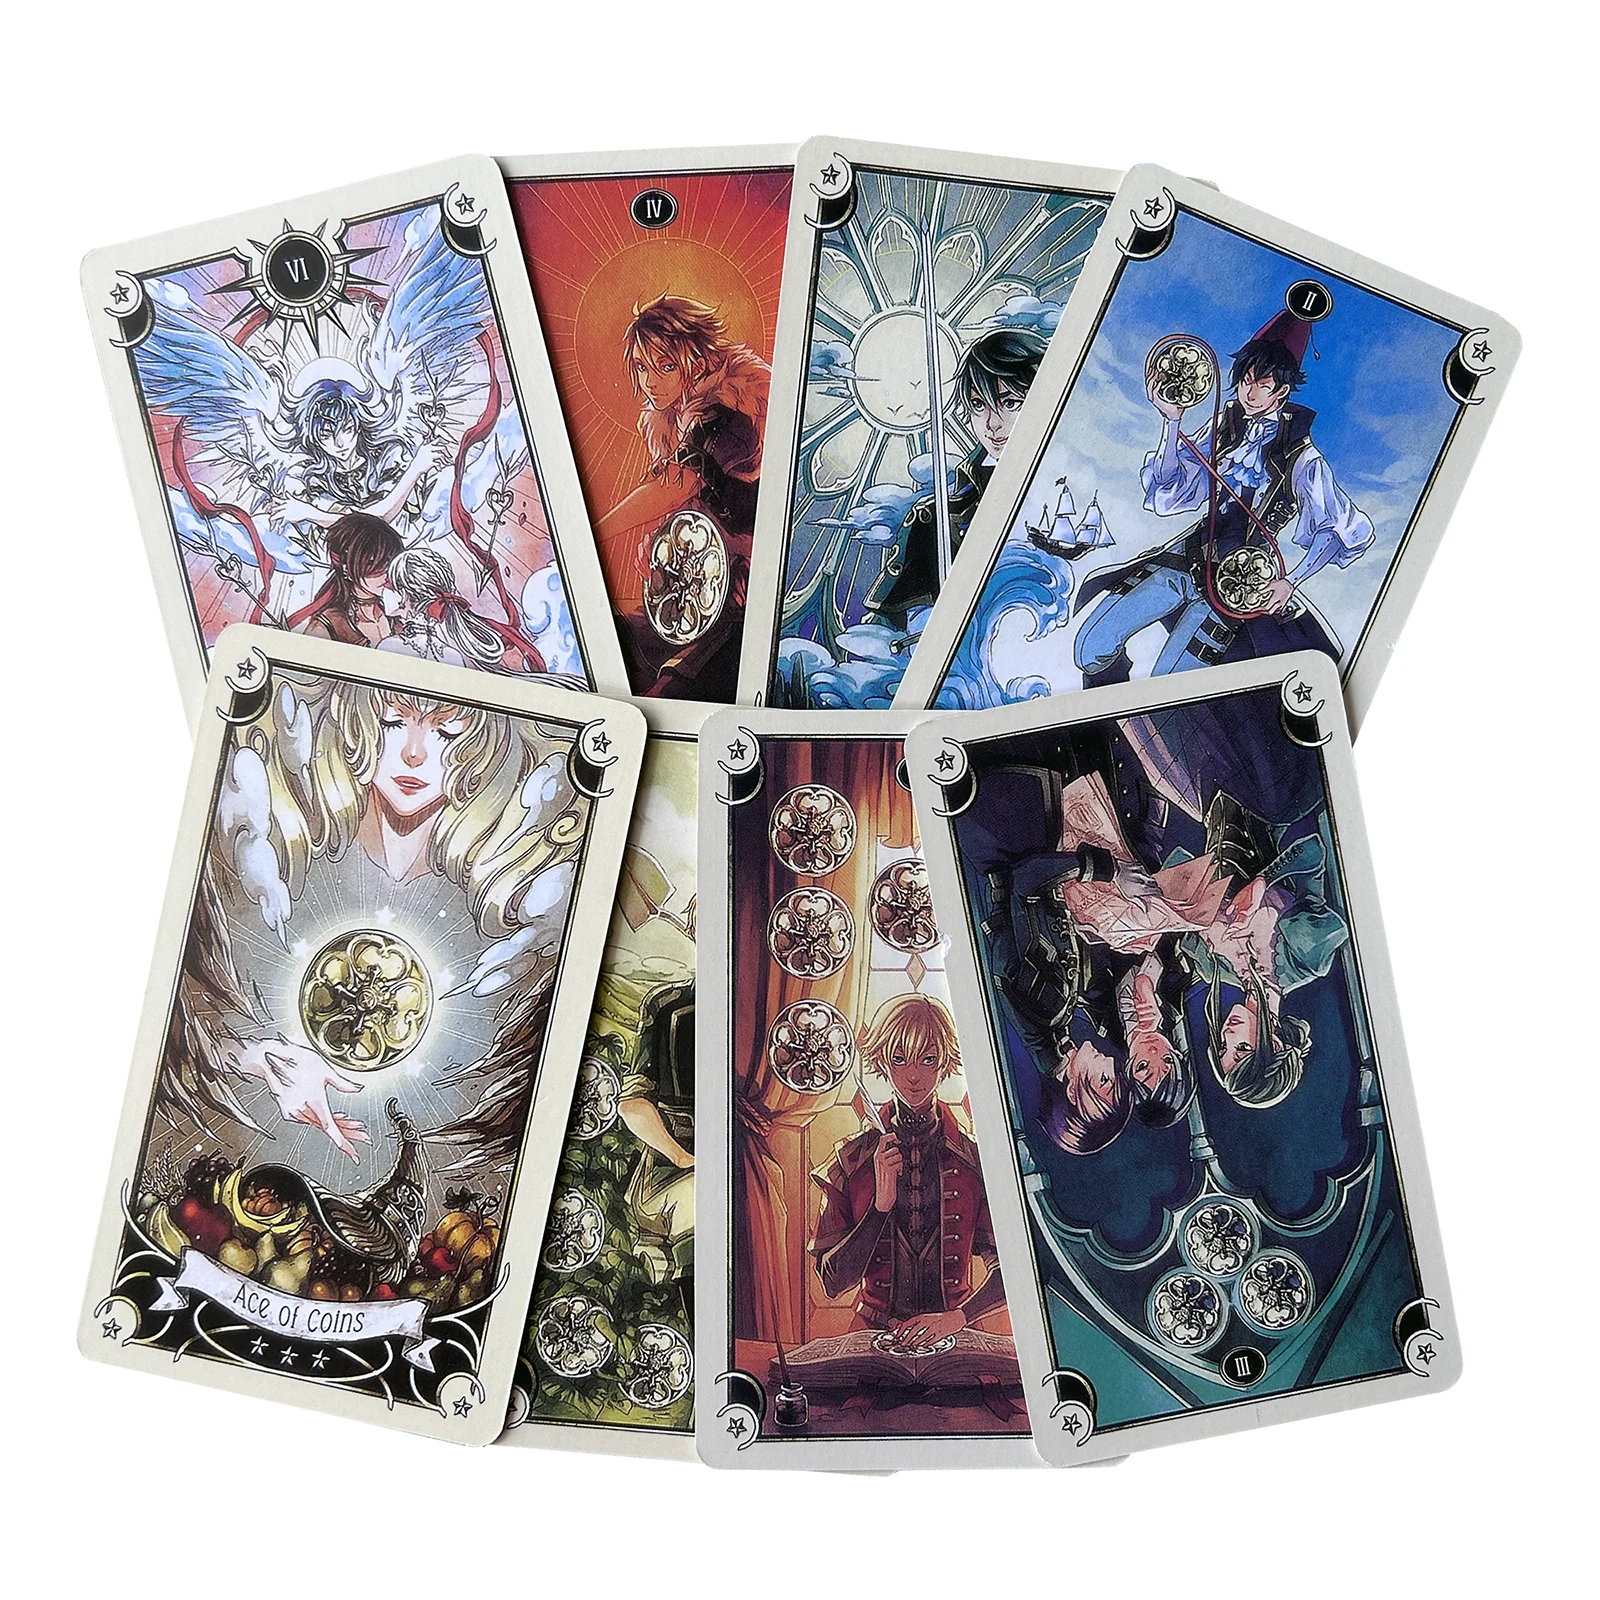 Hot Sell Tarot Cards 12x7 Board Game for Divination Personal Use Tarot Deck Party Games Full English Table Game Outdoor Camping.